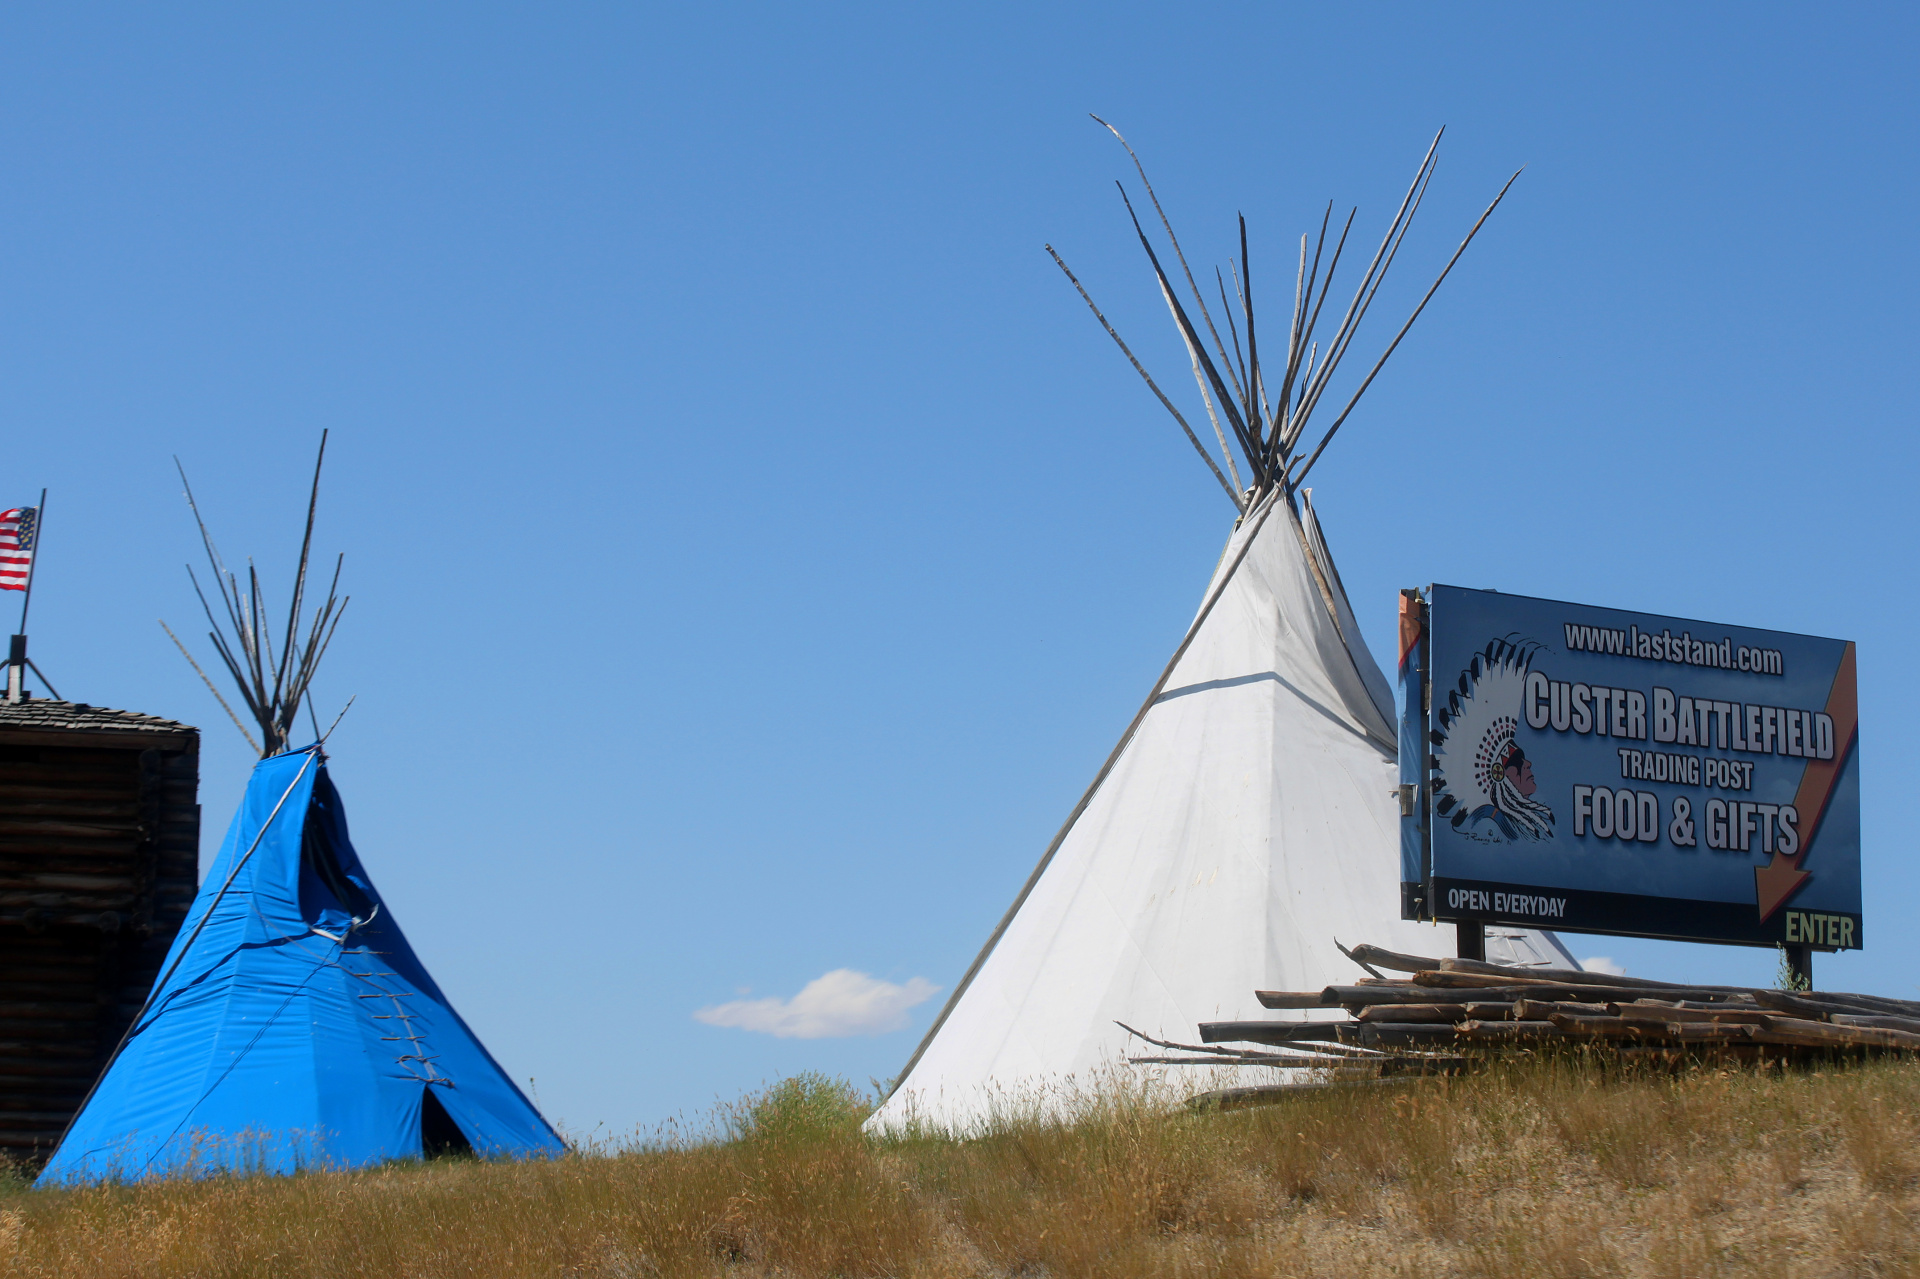 Custer Battlefield Trading Post (Travels » US Trip 3: The Roads Not Taken » Teepees)